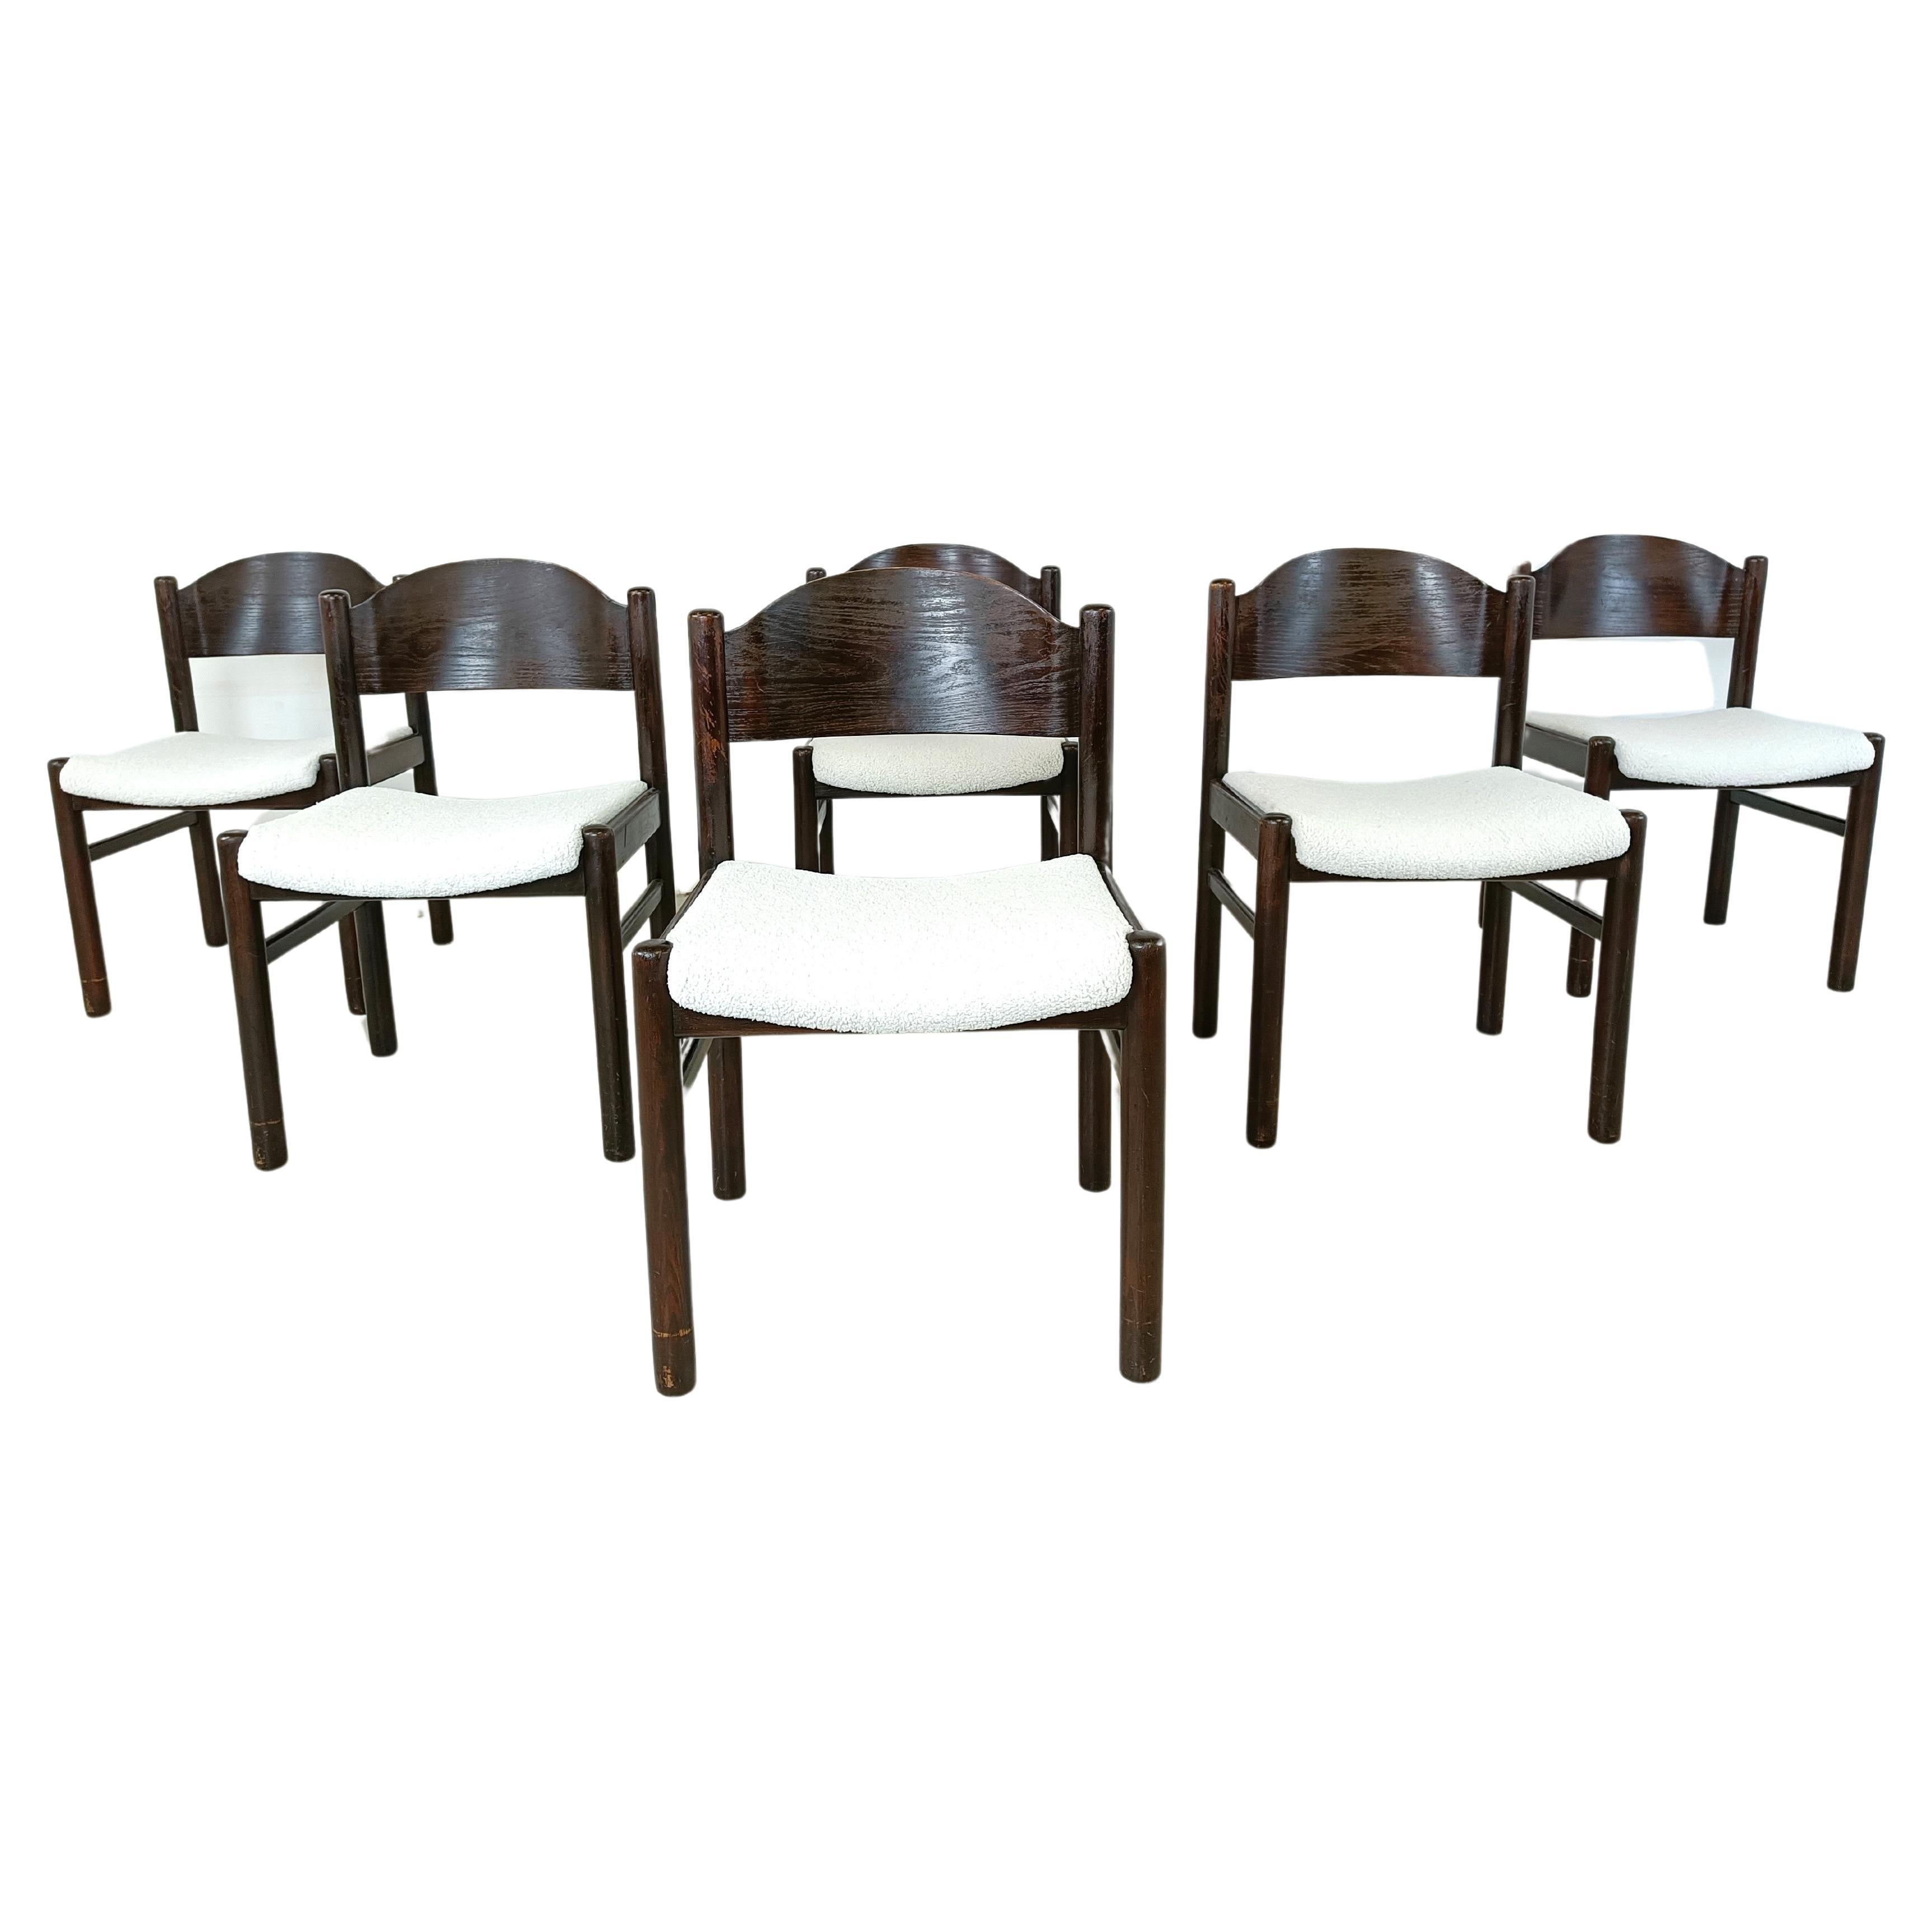 Vintage brutalist dining chairs, set of 6 - 1960s For Sale